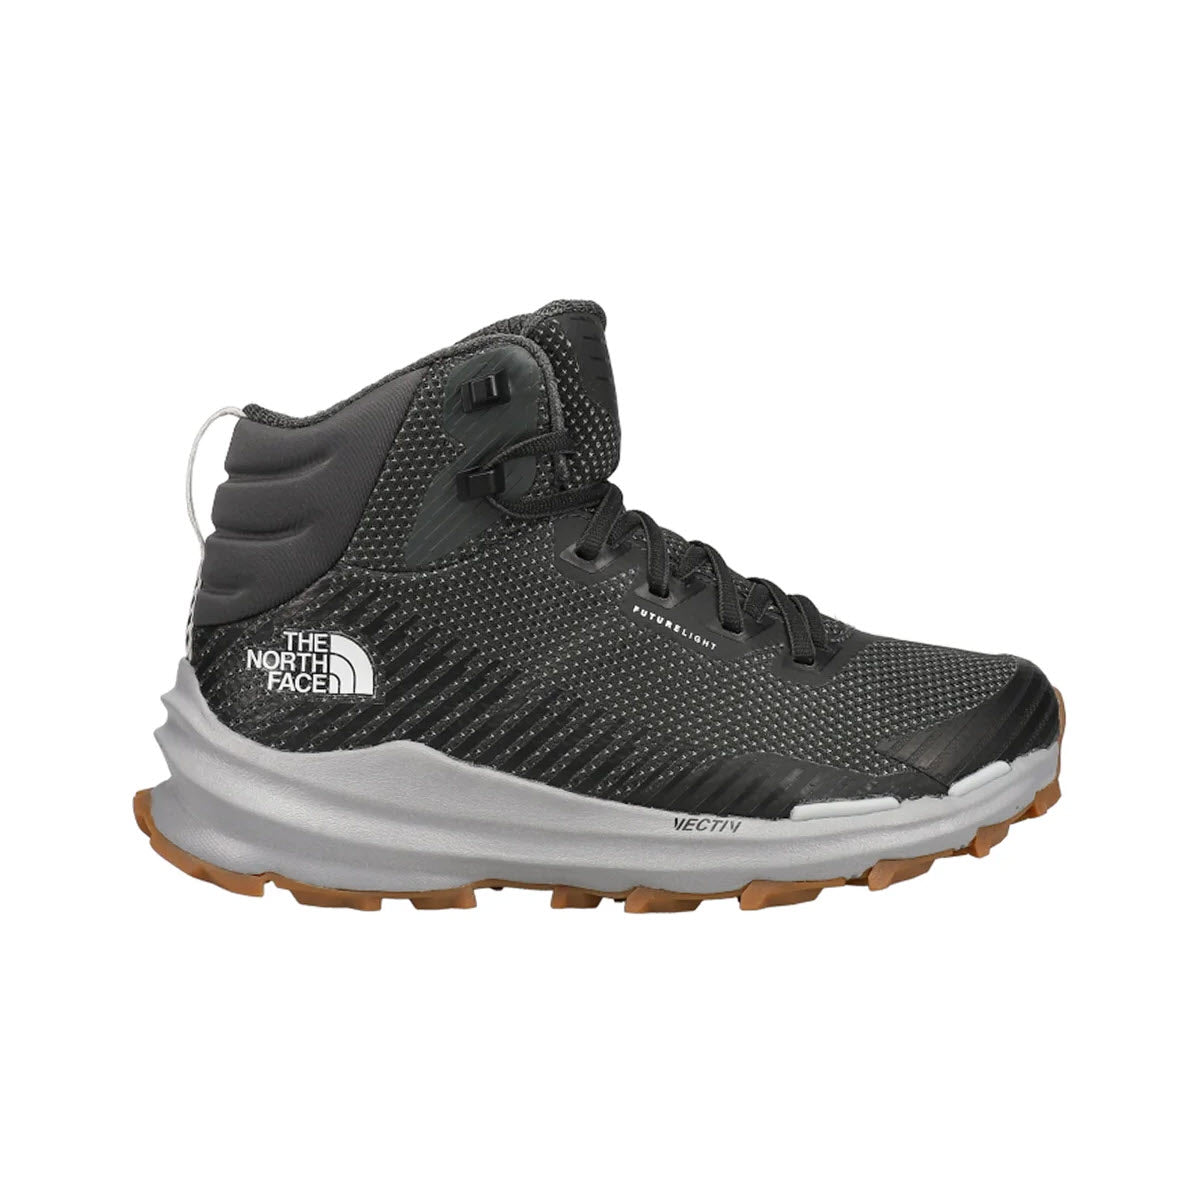 A black North Face VECTIV FASTPACK MID FUTURELIGHT ASPHALT hiking boot with a high ankle, white midsole, and brown outsole, featuring a dotted design and brand logos.